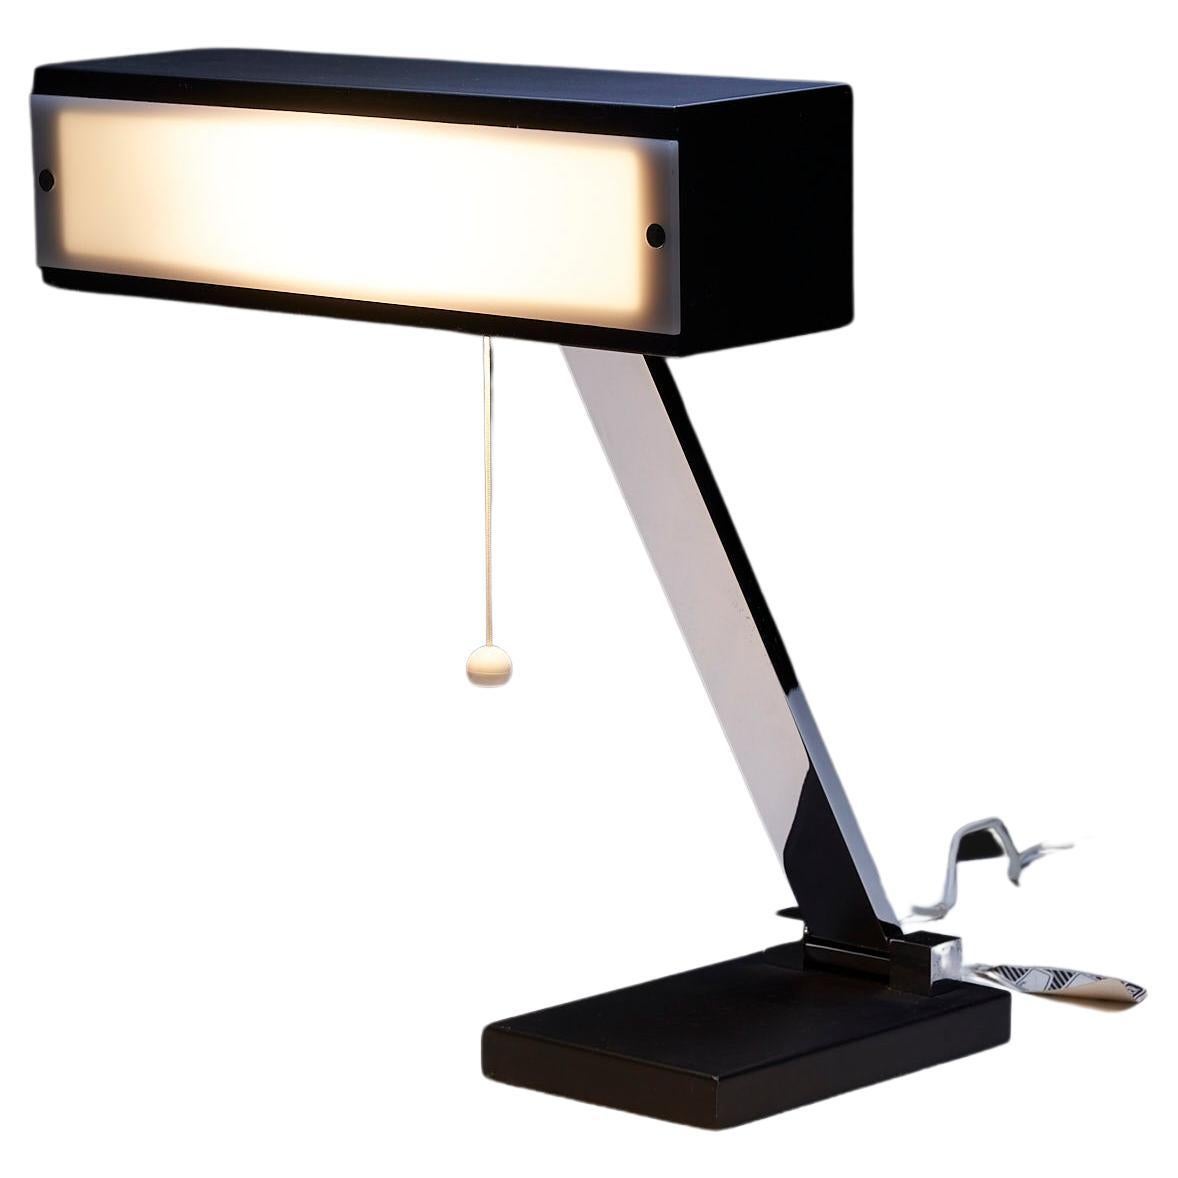 Well-built Table Lamp by Boulanger